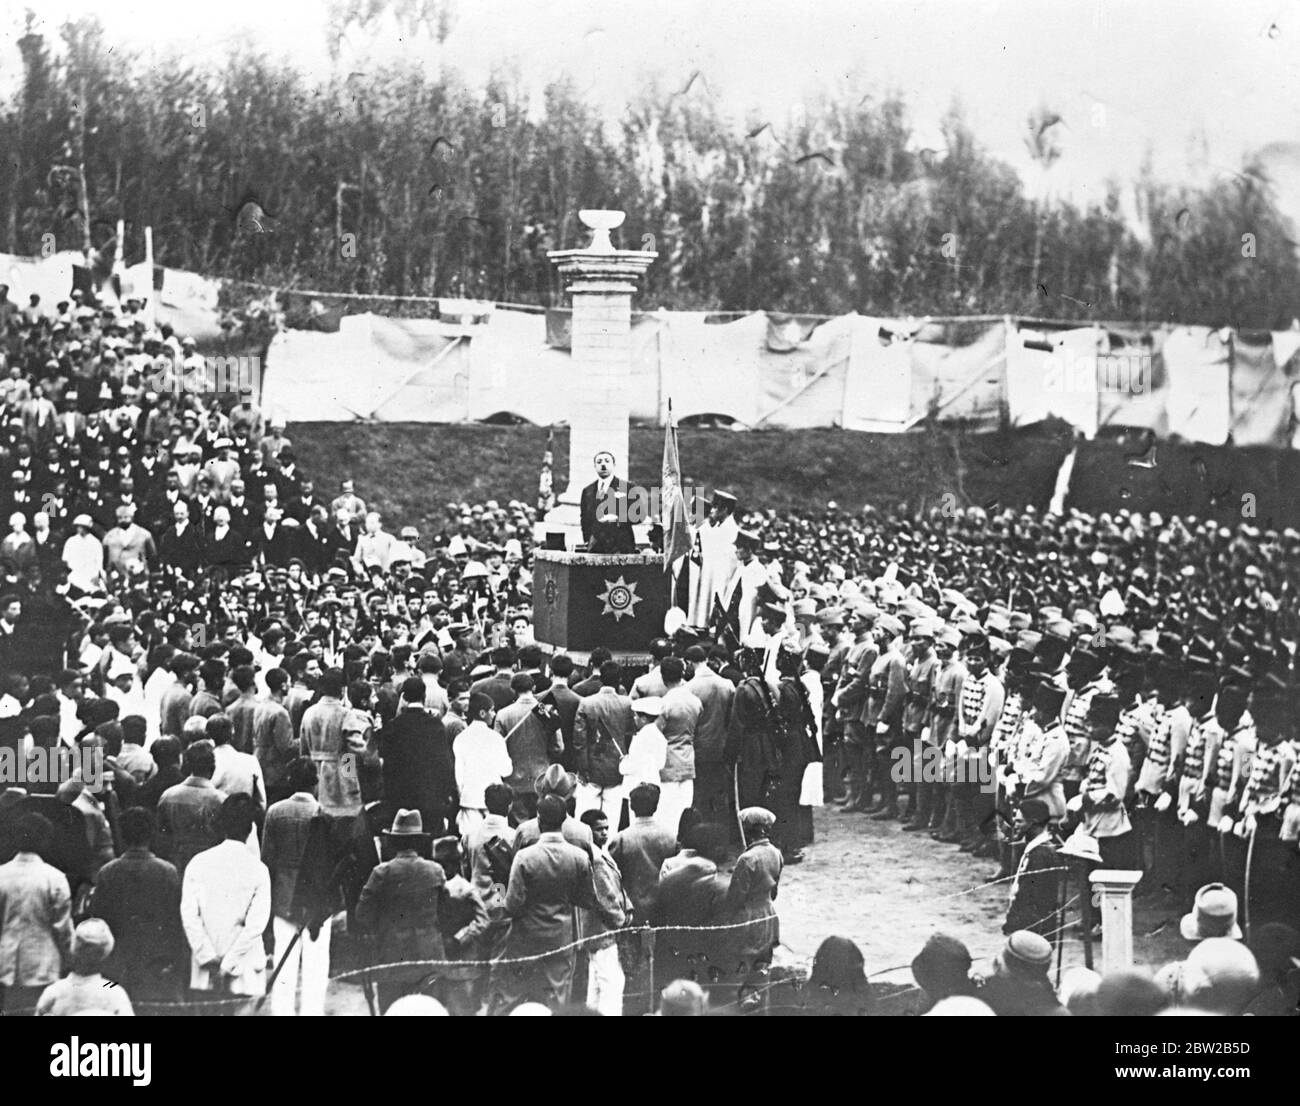 King of Afghanistan addresses his subjects. King Amanullah speaking at the opening of the Amonic Garden. Note the European costume worn by the mullahs. 27 October 1928 Stock Photo